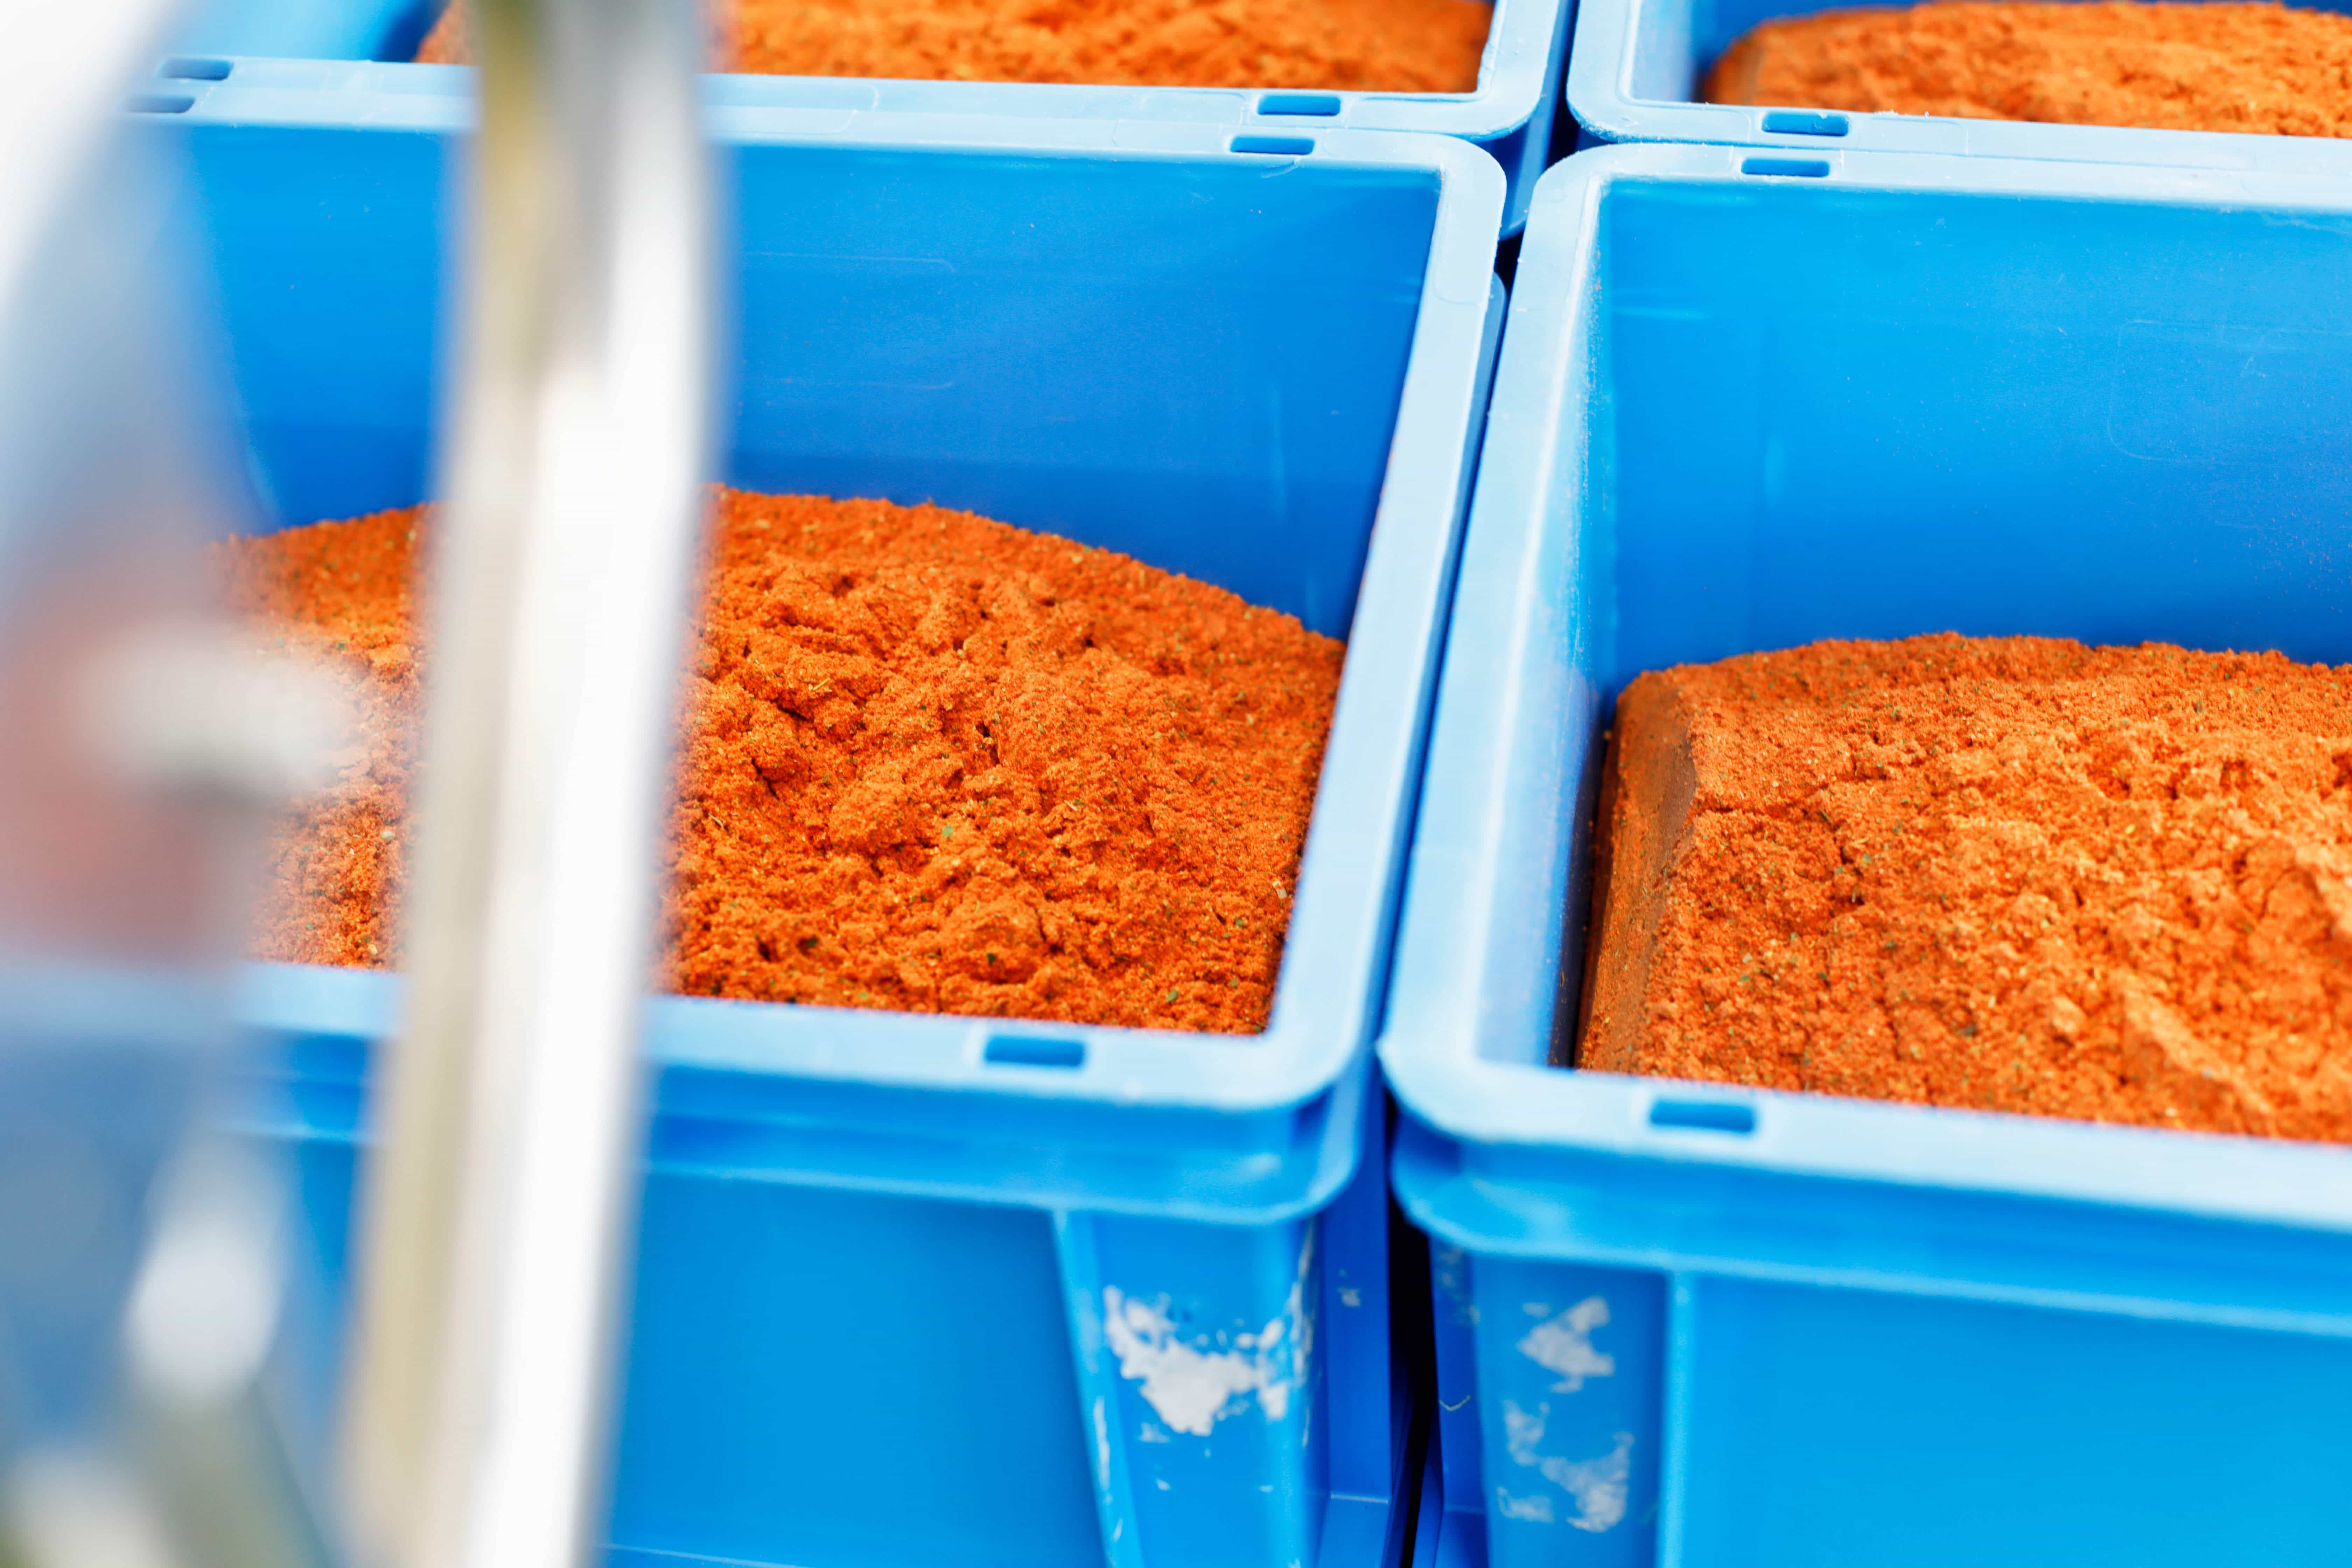 Orange spices in blue boxes